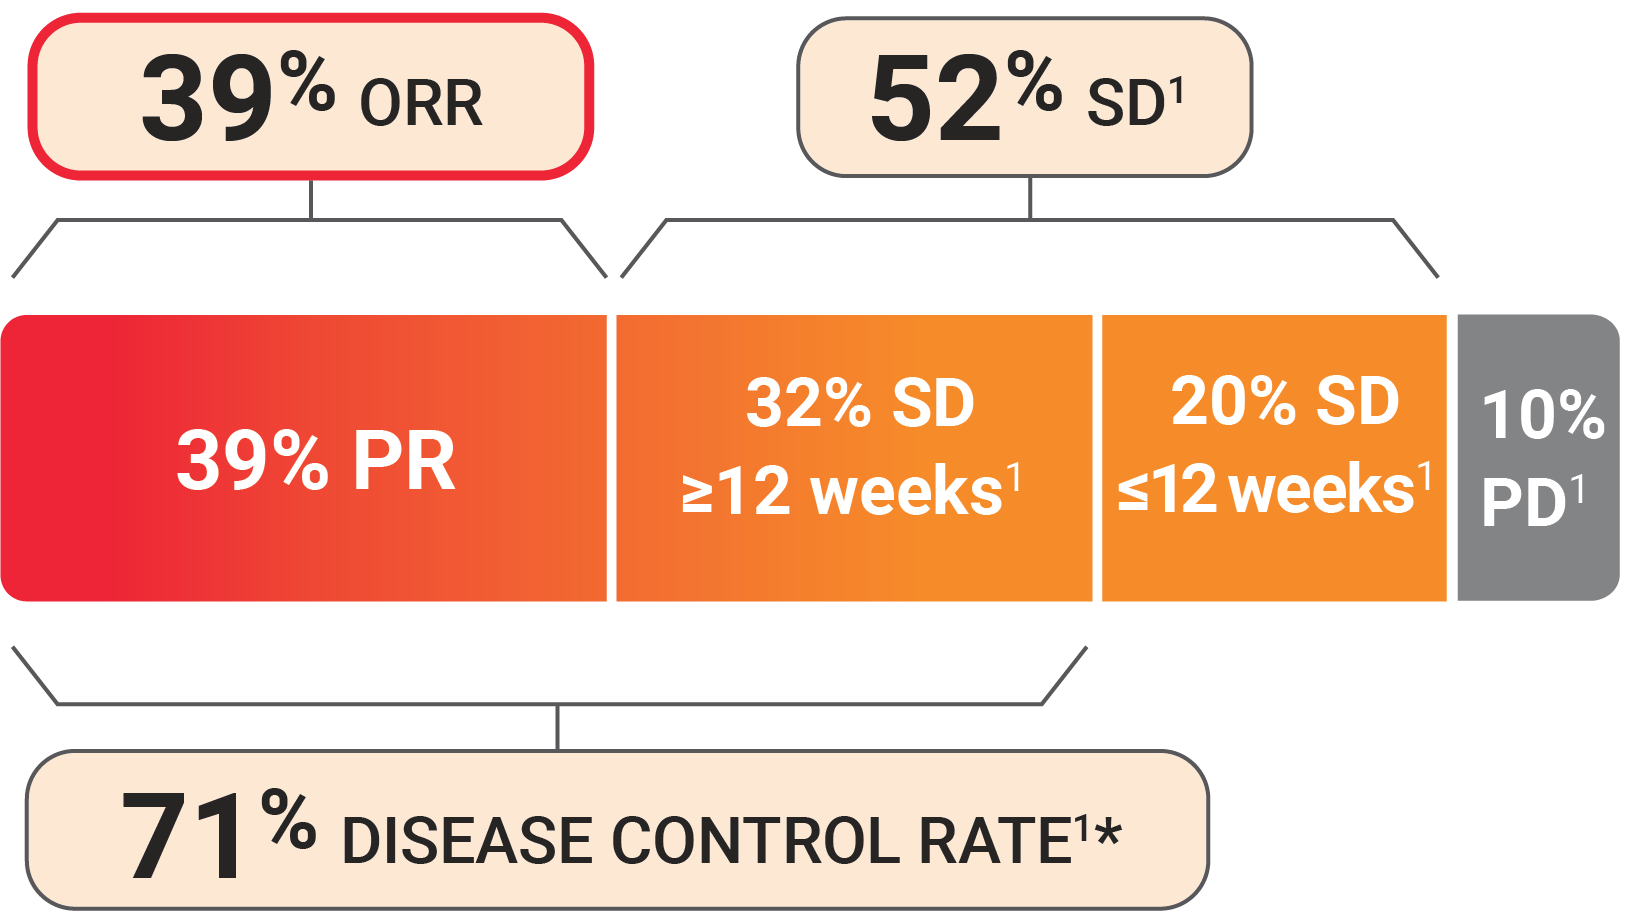 Overall Response Rate, Stabile Disease, Disease Control Rate 